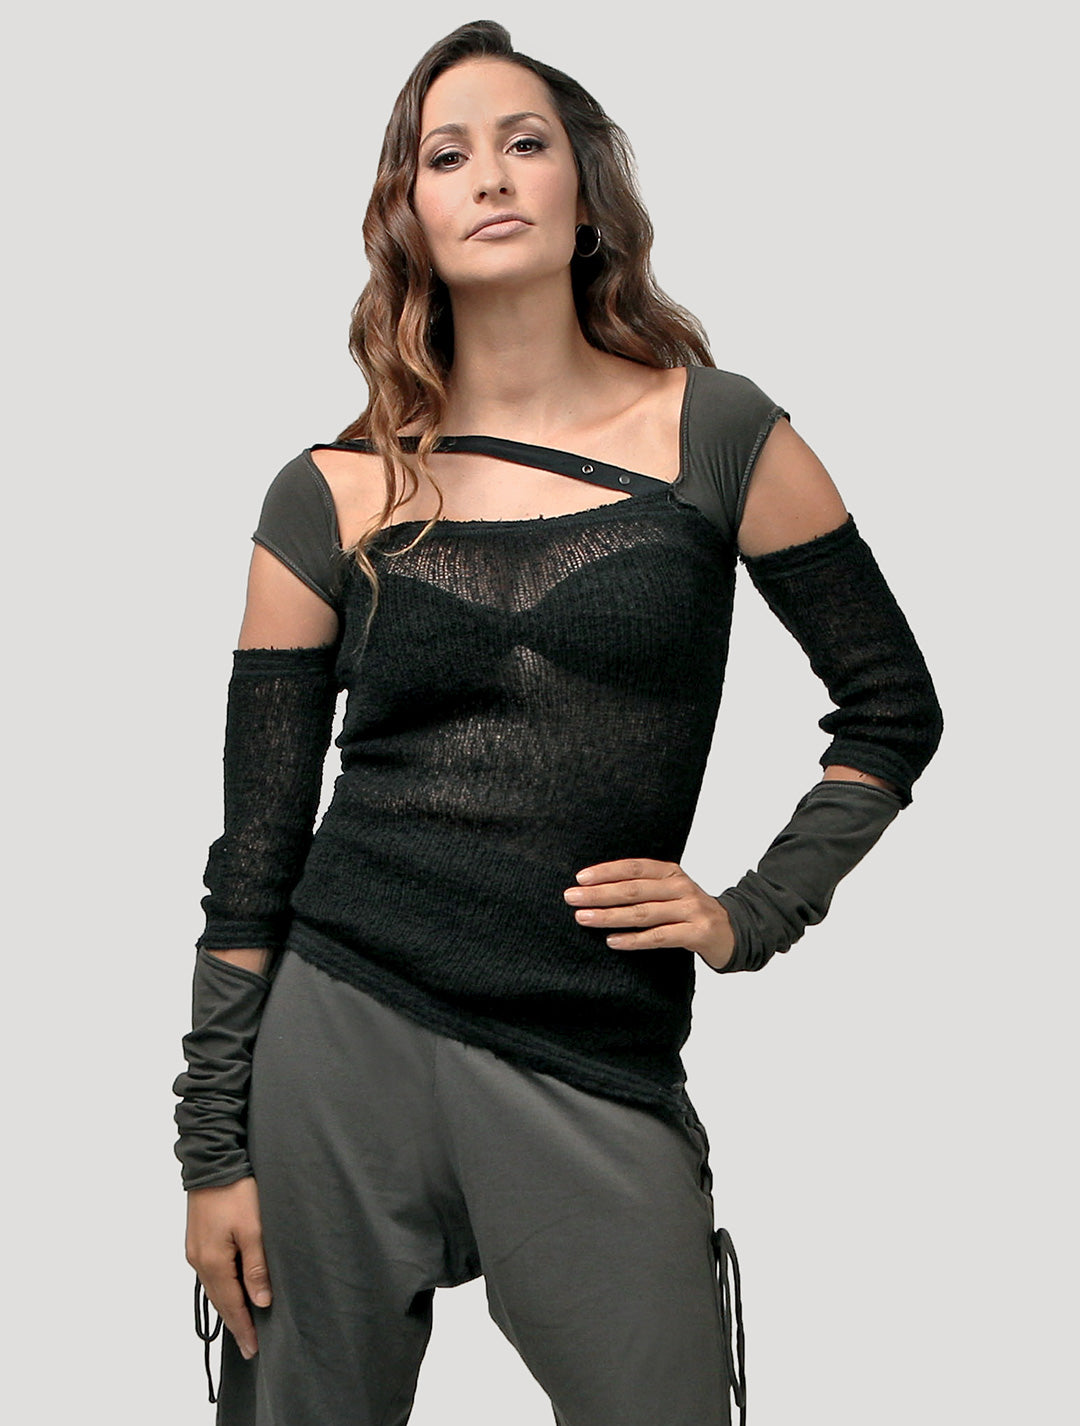 Wholesale fishnet shirt mesh top For Stylish Expression 